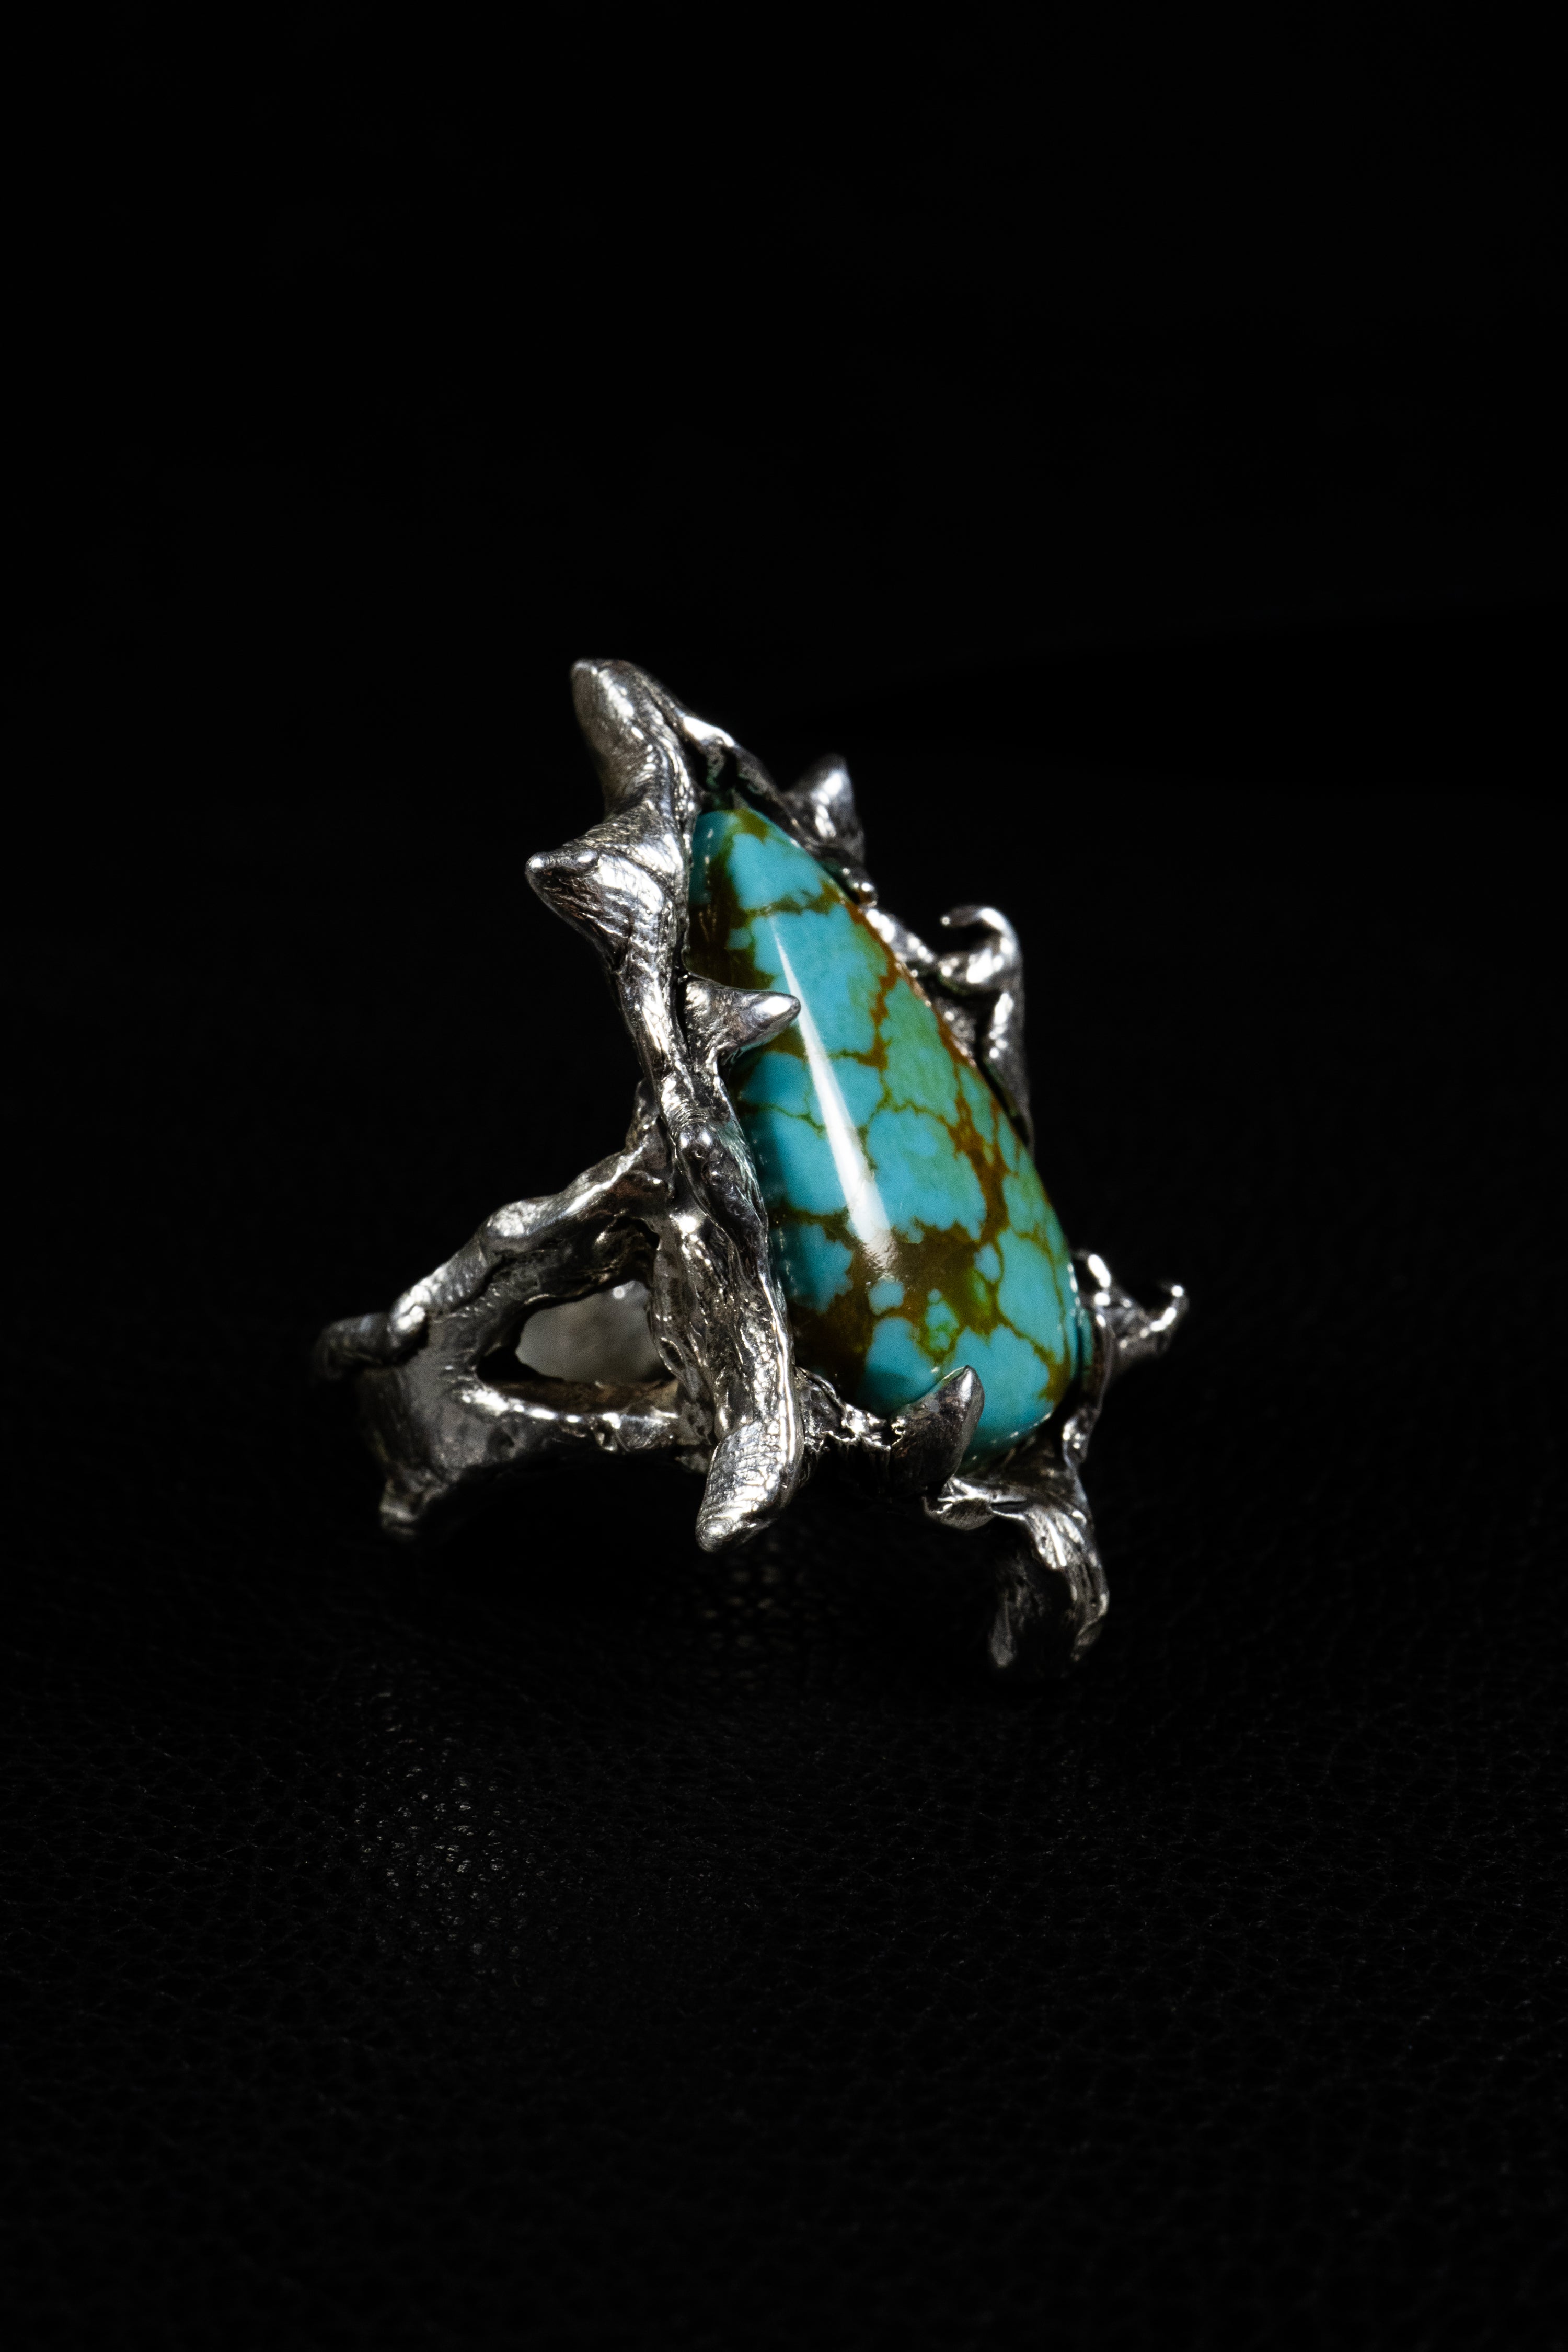 Genesis (Tyrone Turquoise, Sterling Silver Ring)